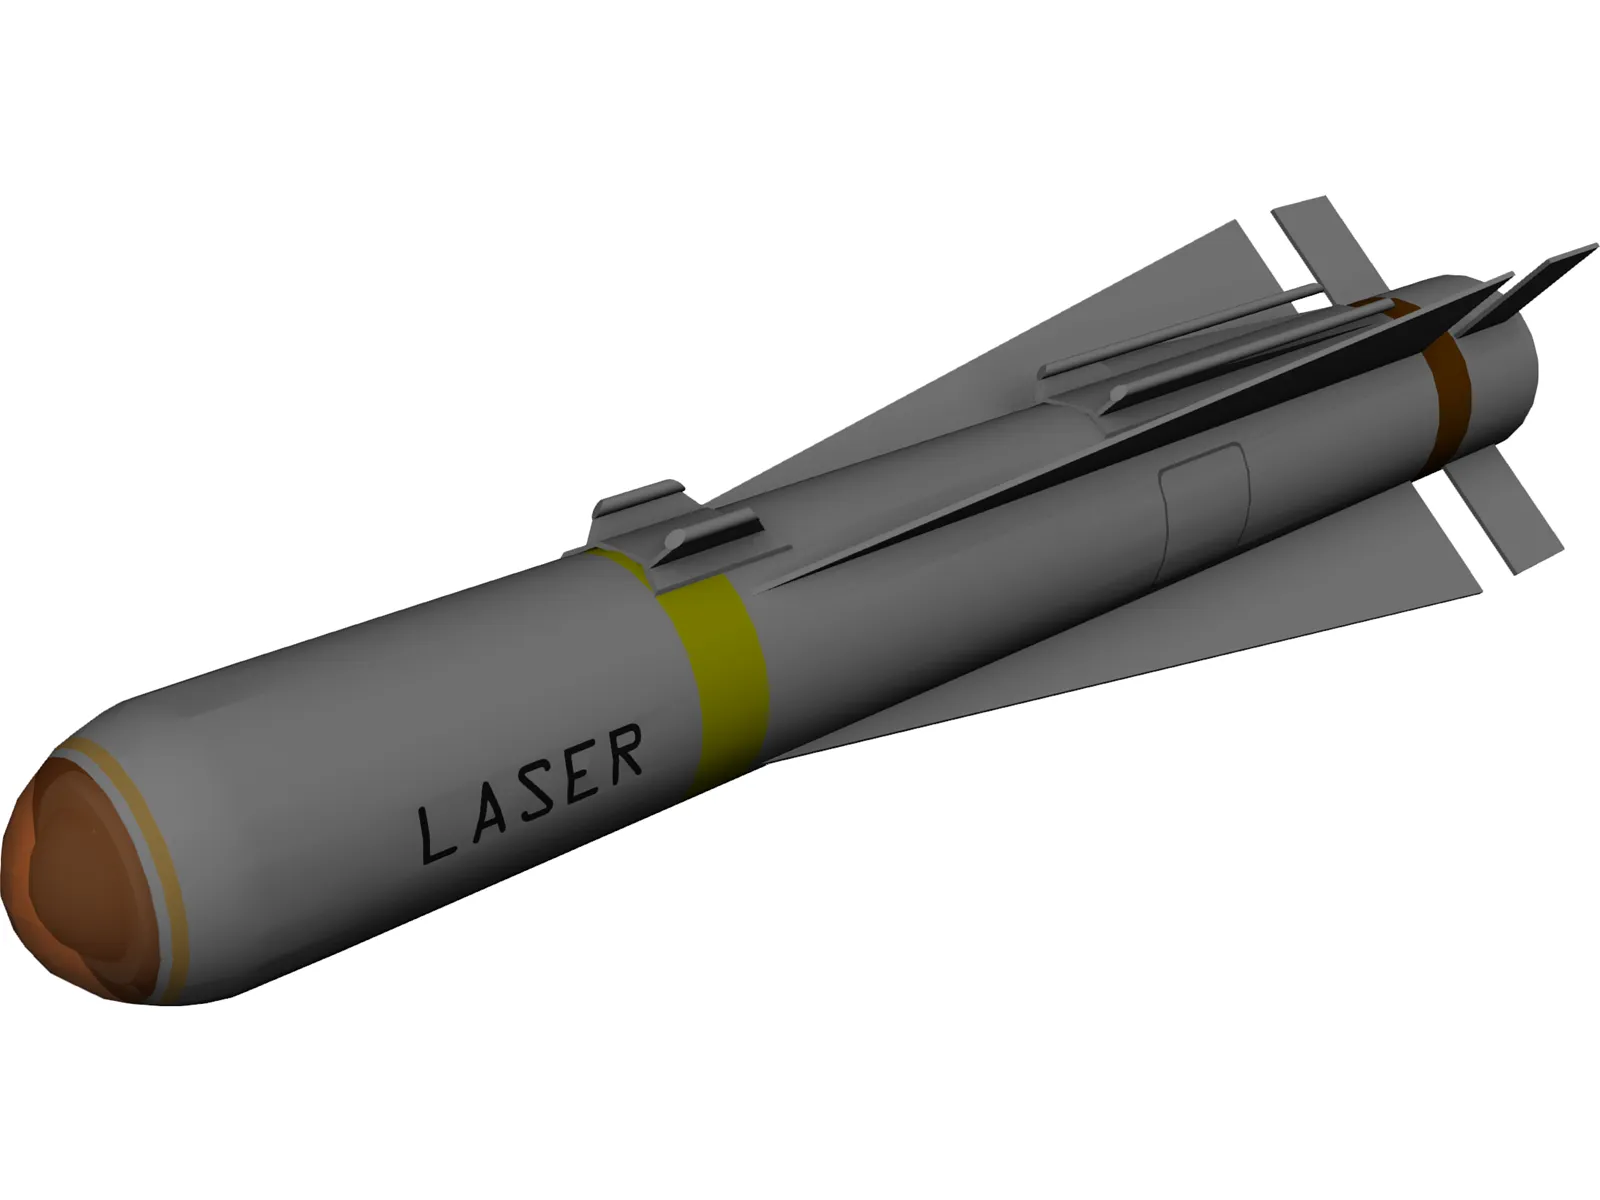 Raytheon AGM-65E Laser Maverick Air-to-Surface Missile 3D Model